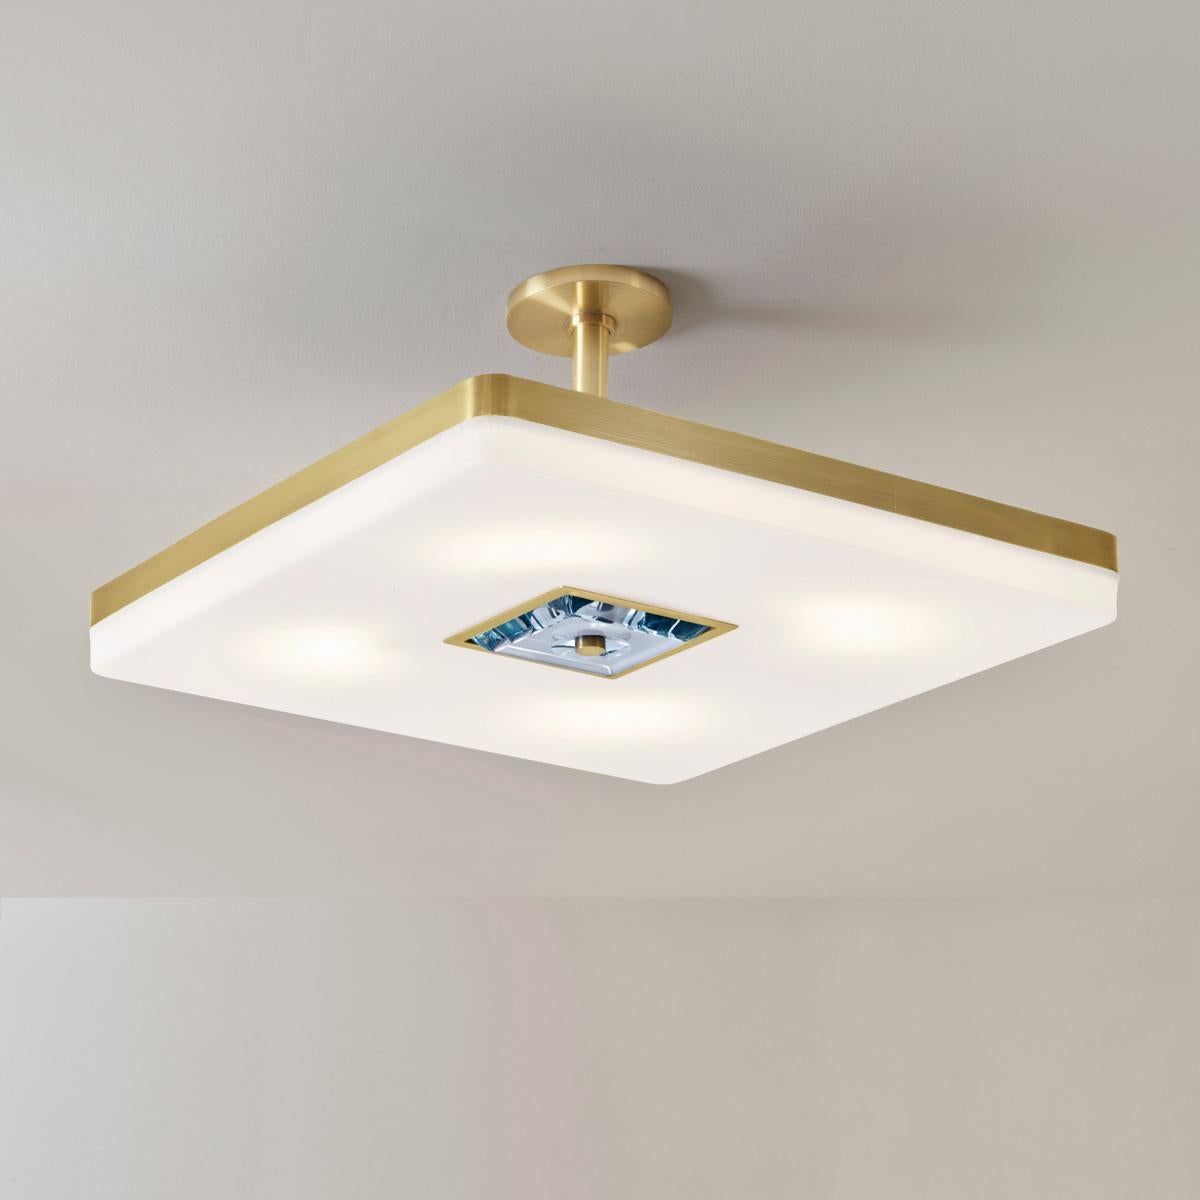 The Iris Square ceiling light is designed around an expansive acrylic shade with a hand carved glass center reminiscent of a gemstone. This versatile fixture can be installed as a pendant on a stem or as a flush mount. Can be used with the Iris